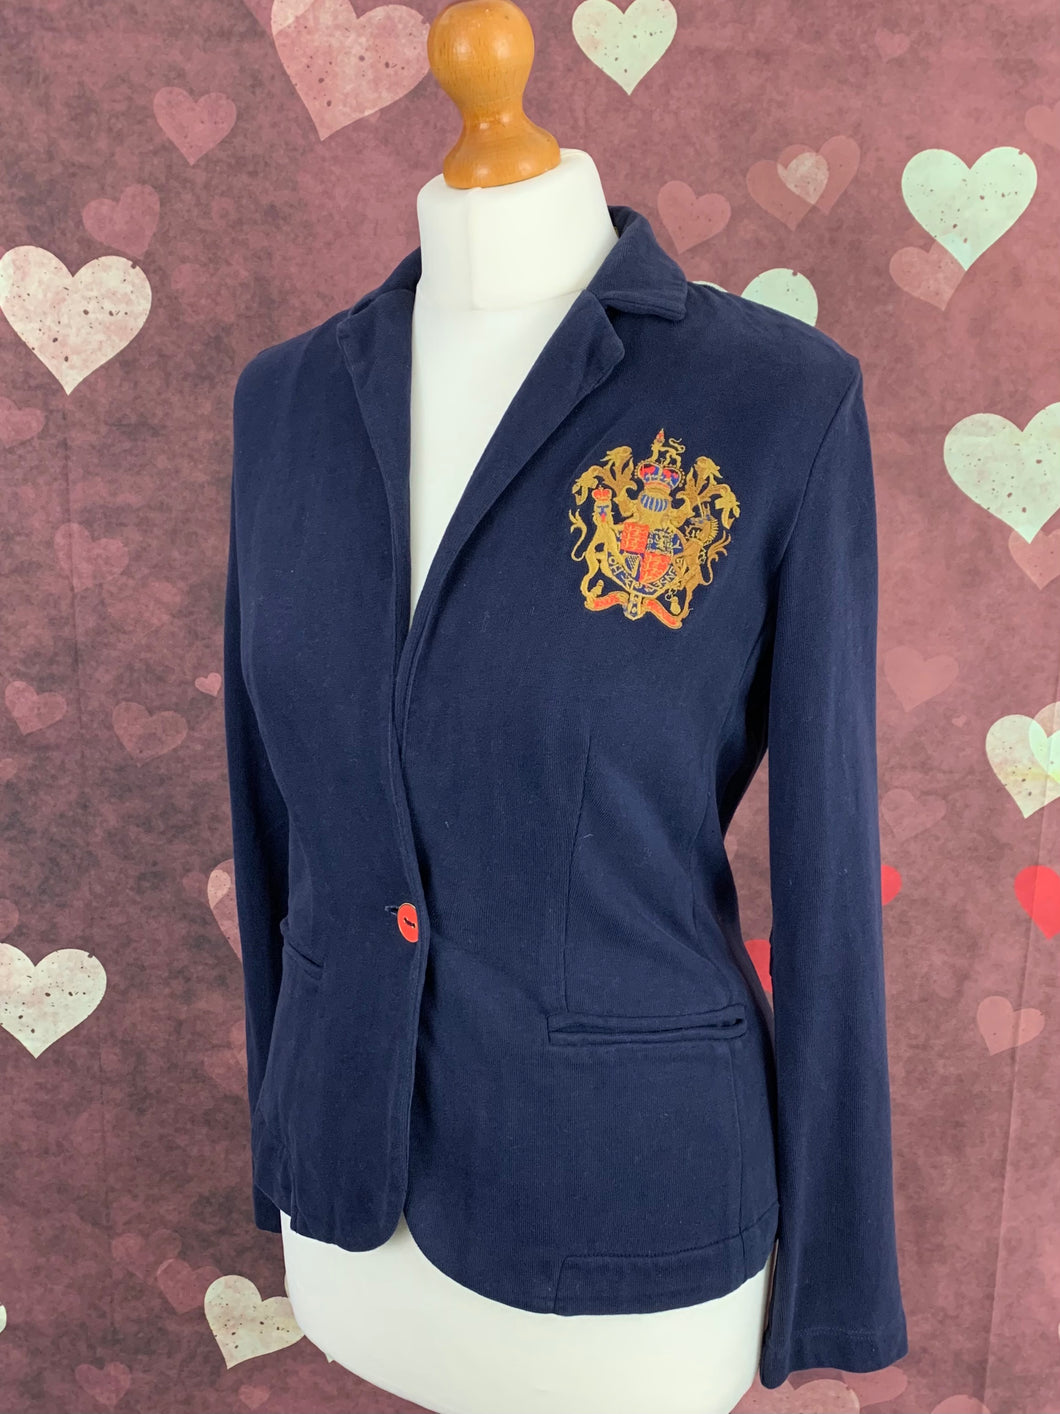 JOULES Navy HARRIET Coat of Arms JERSEY BLAZER / JACKET Size UK 10 Small S